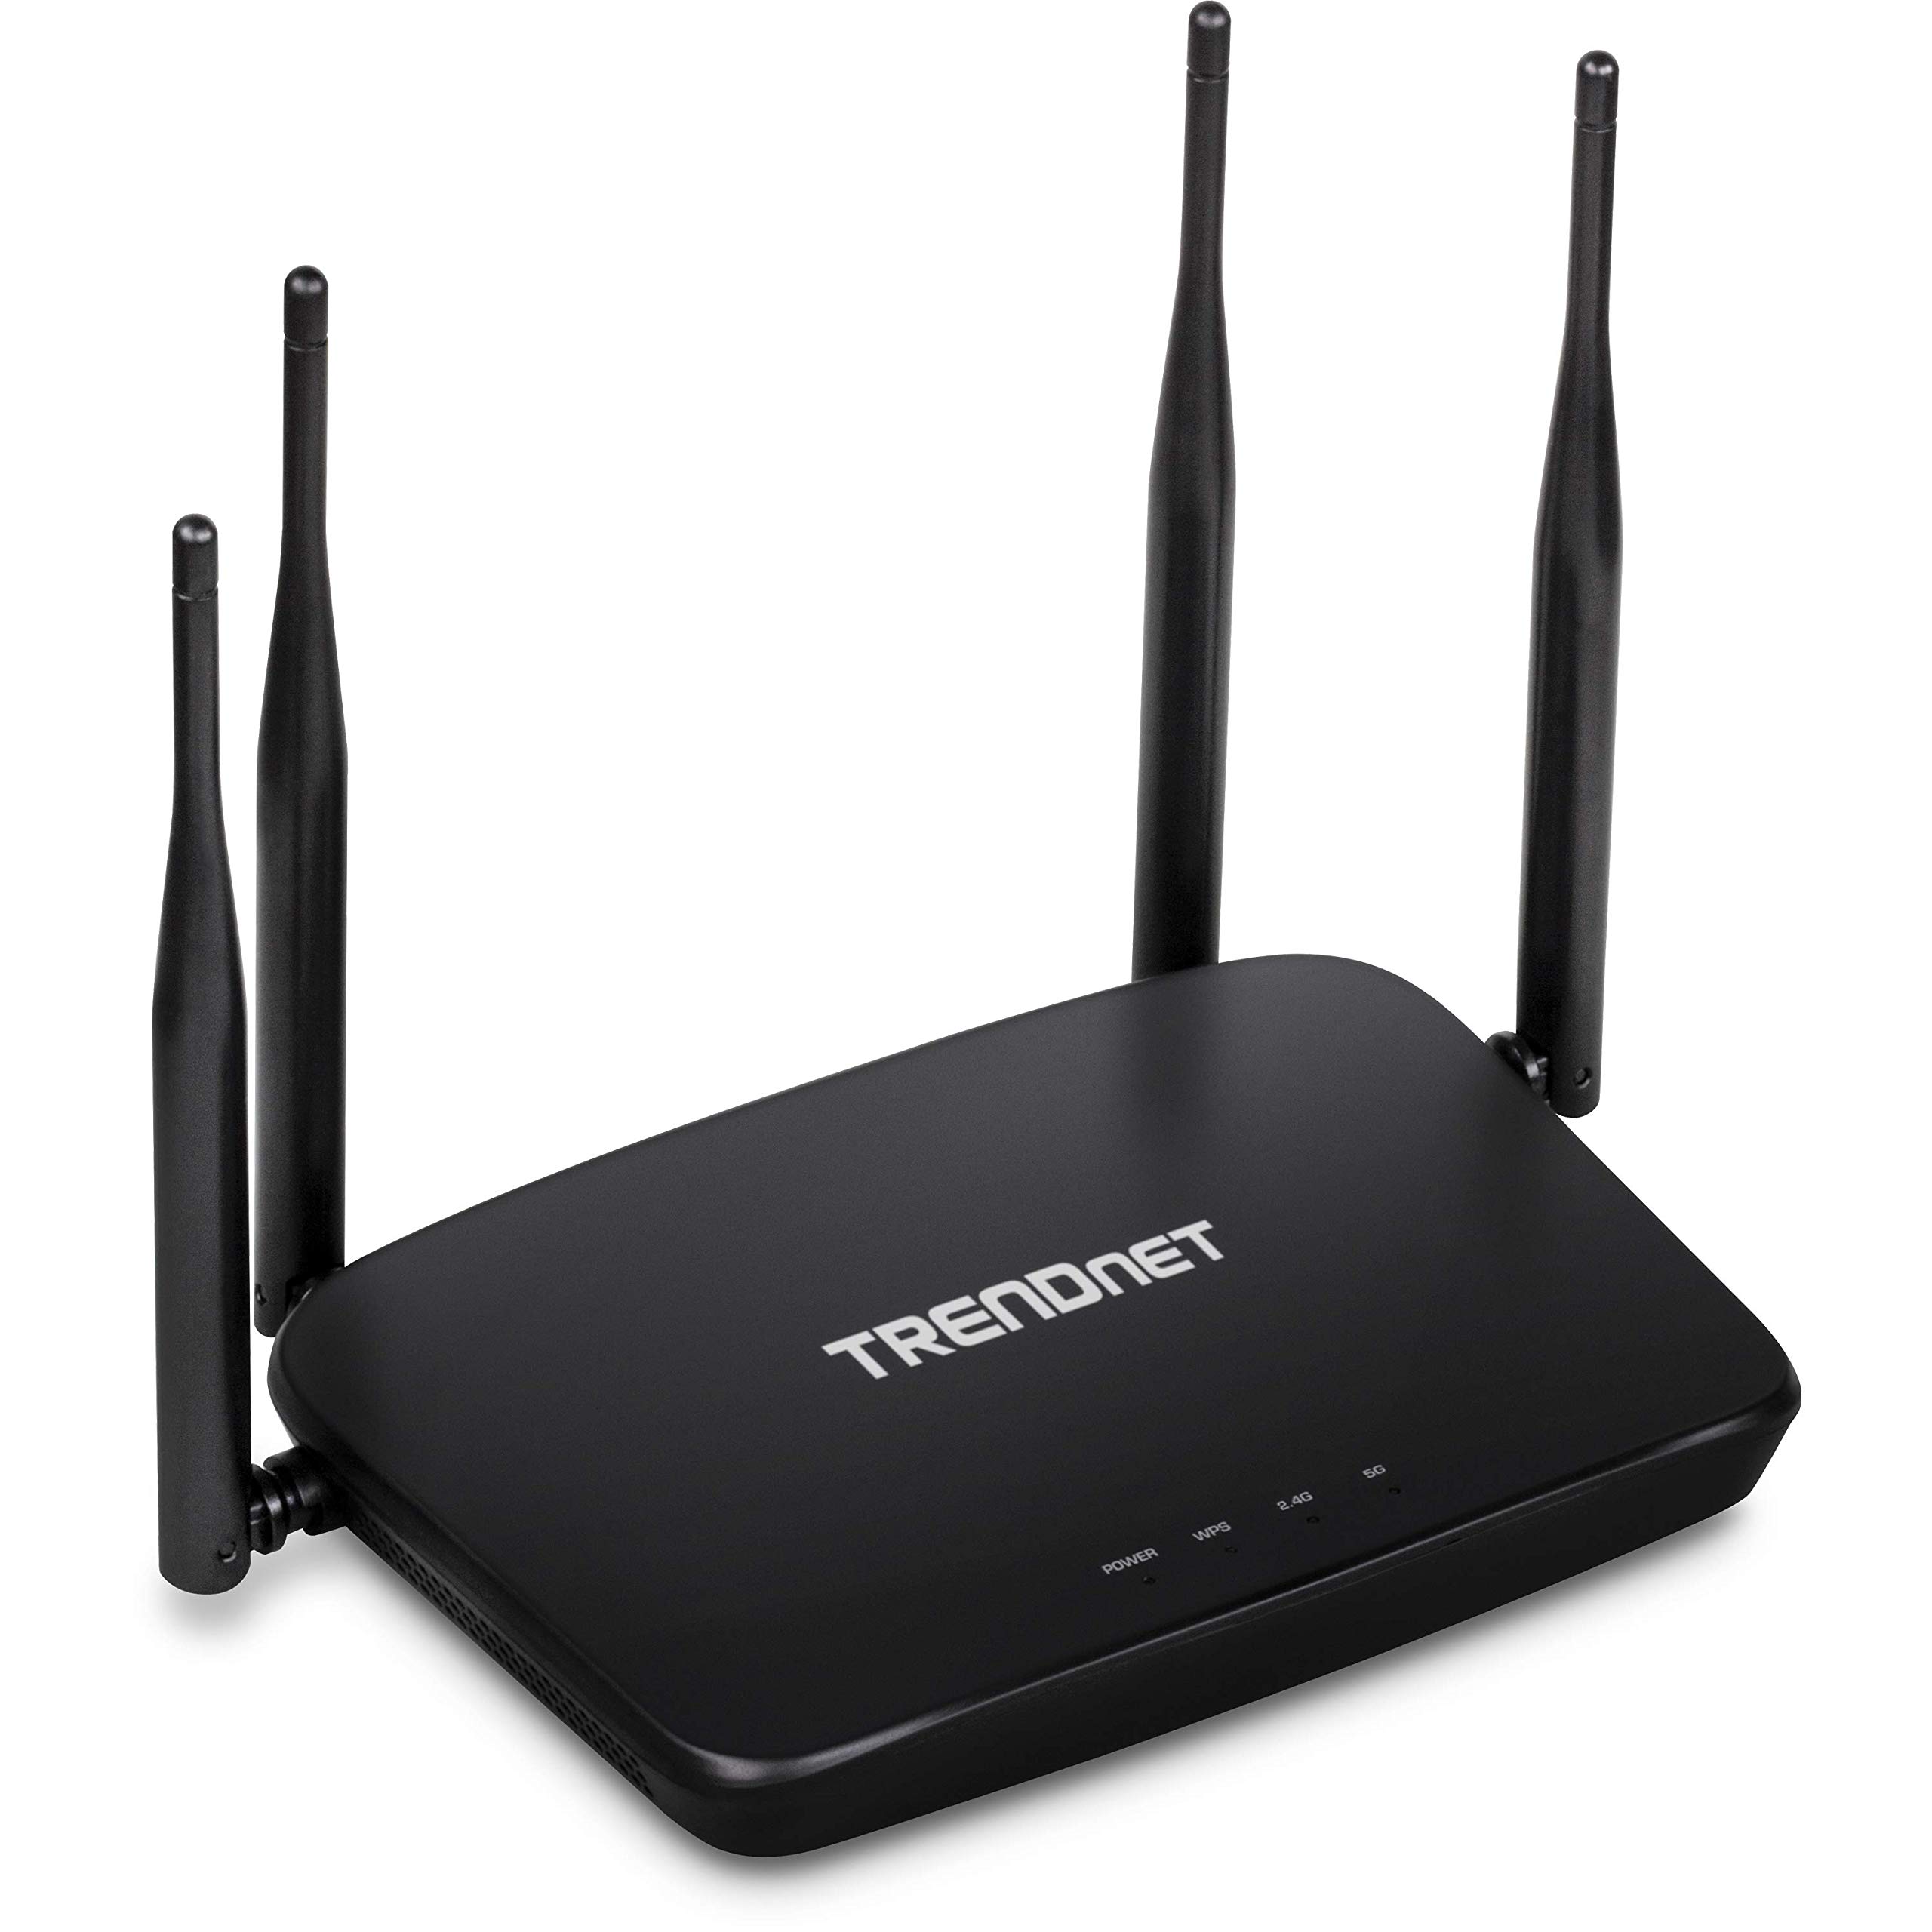 TRENDnet AC1200 Dual Band WiFi Router, TEW-831DR (Renewed)